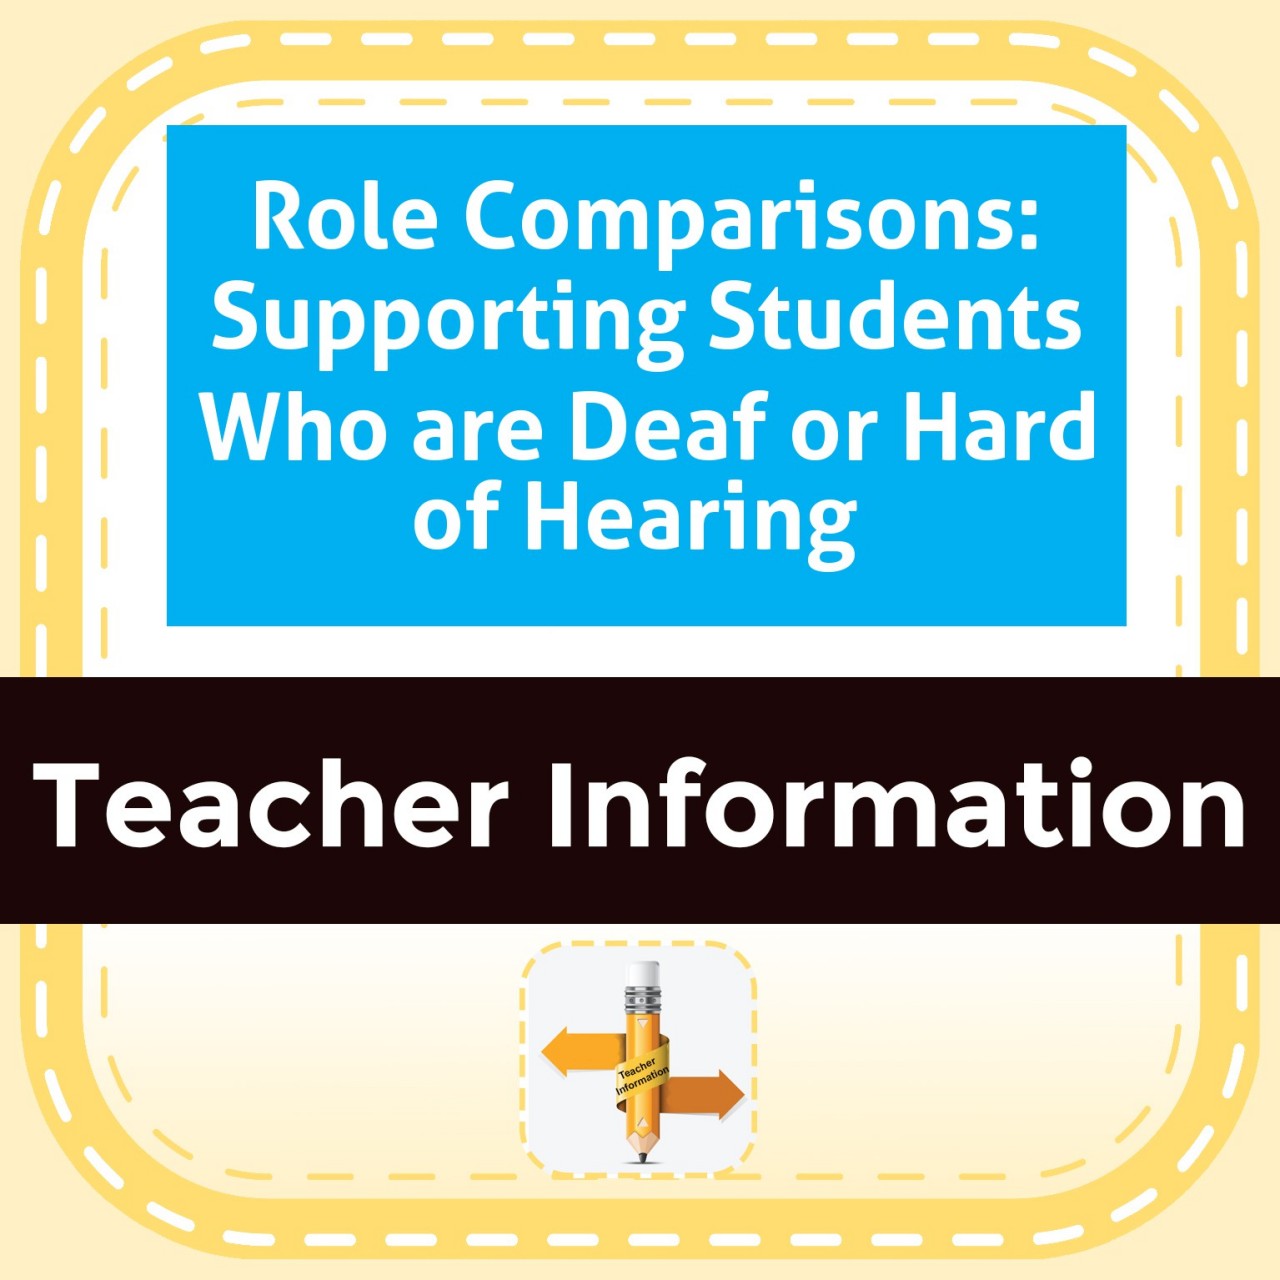 Role Comparisons: Supporting Students Who are Deaf or Hard of Hearing 